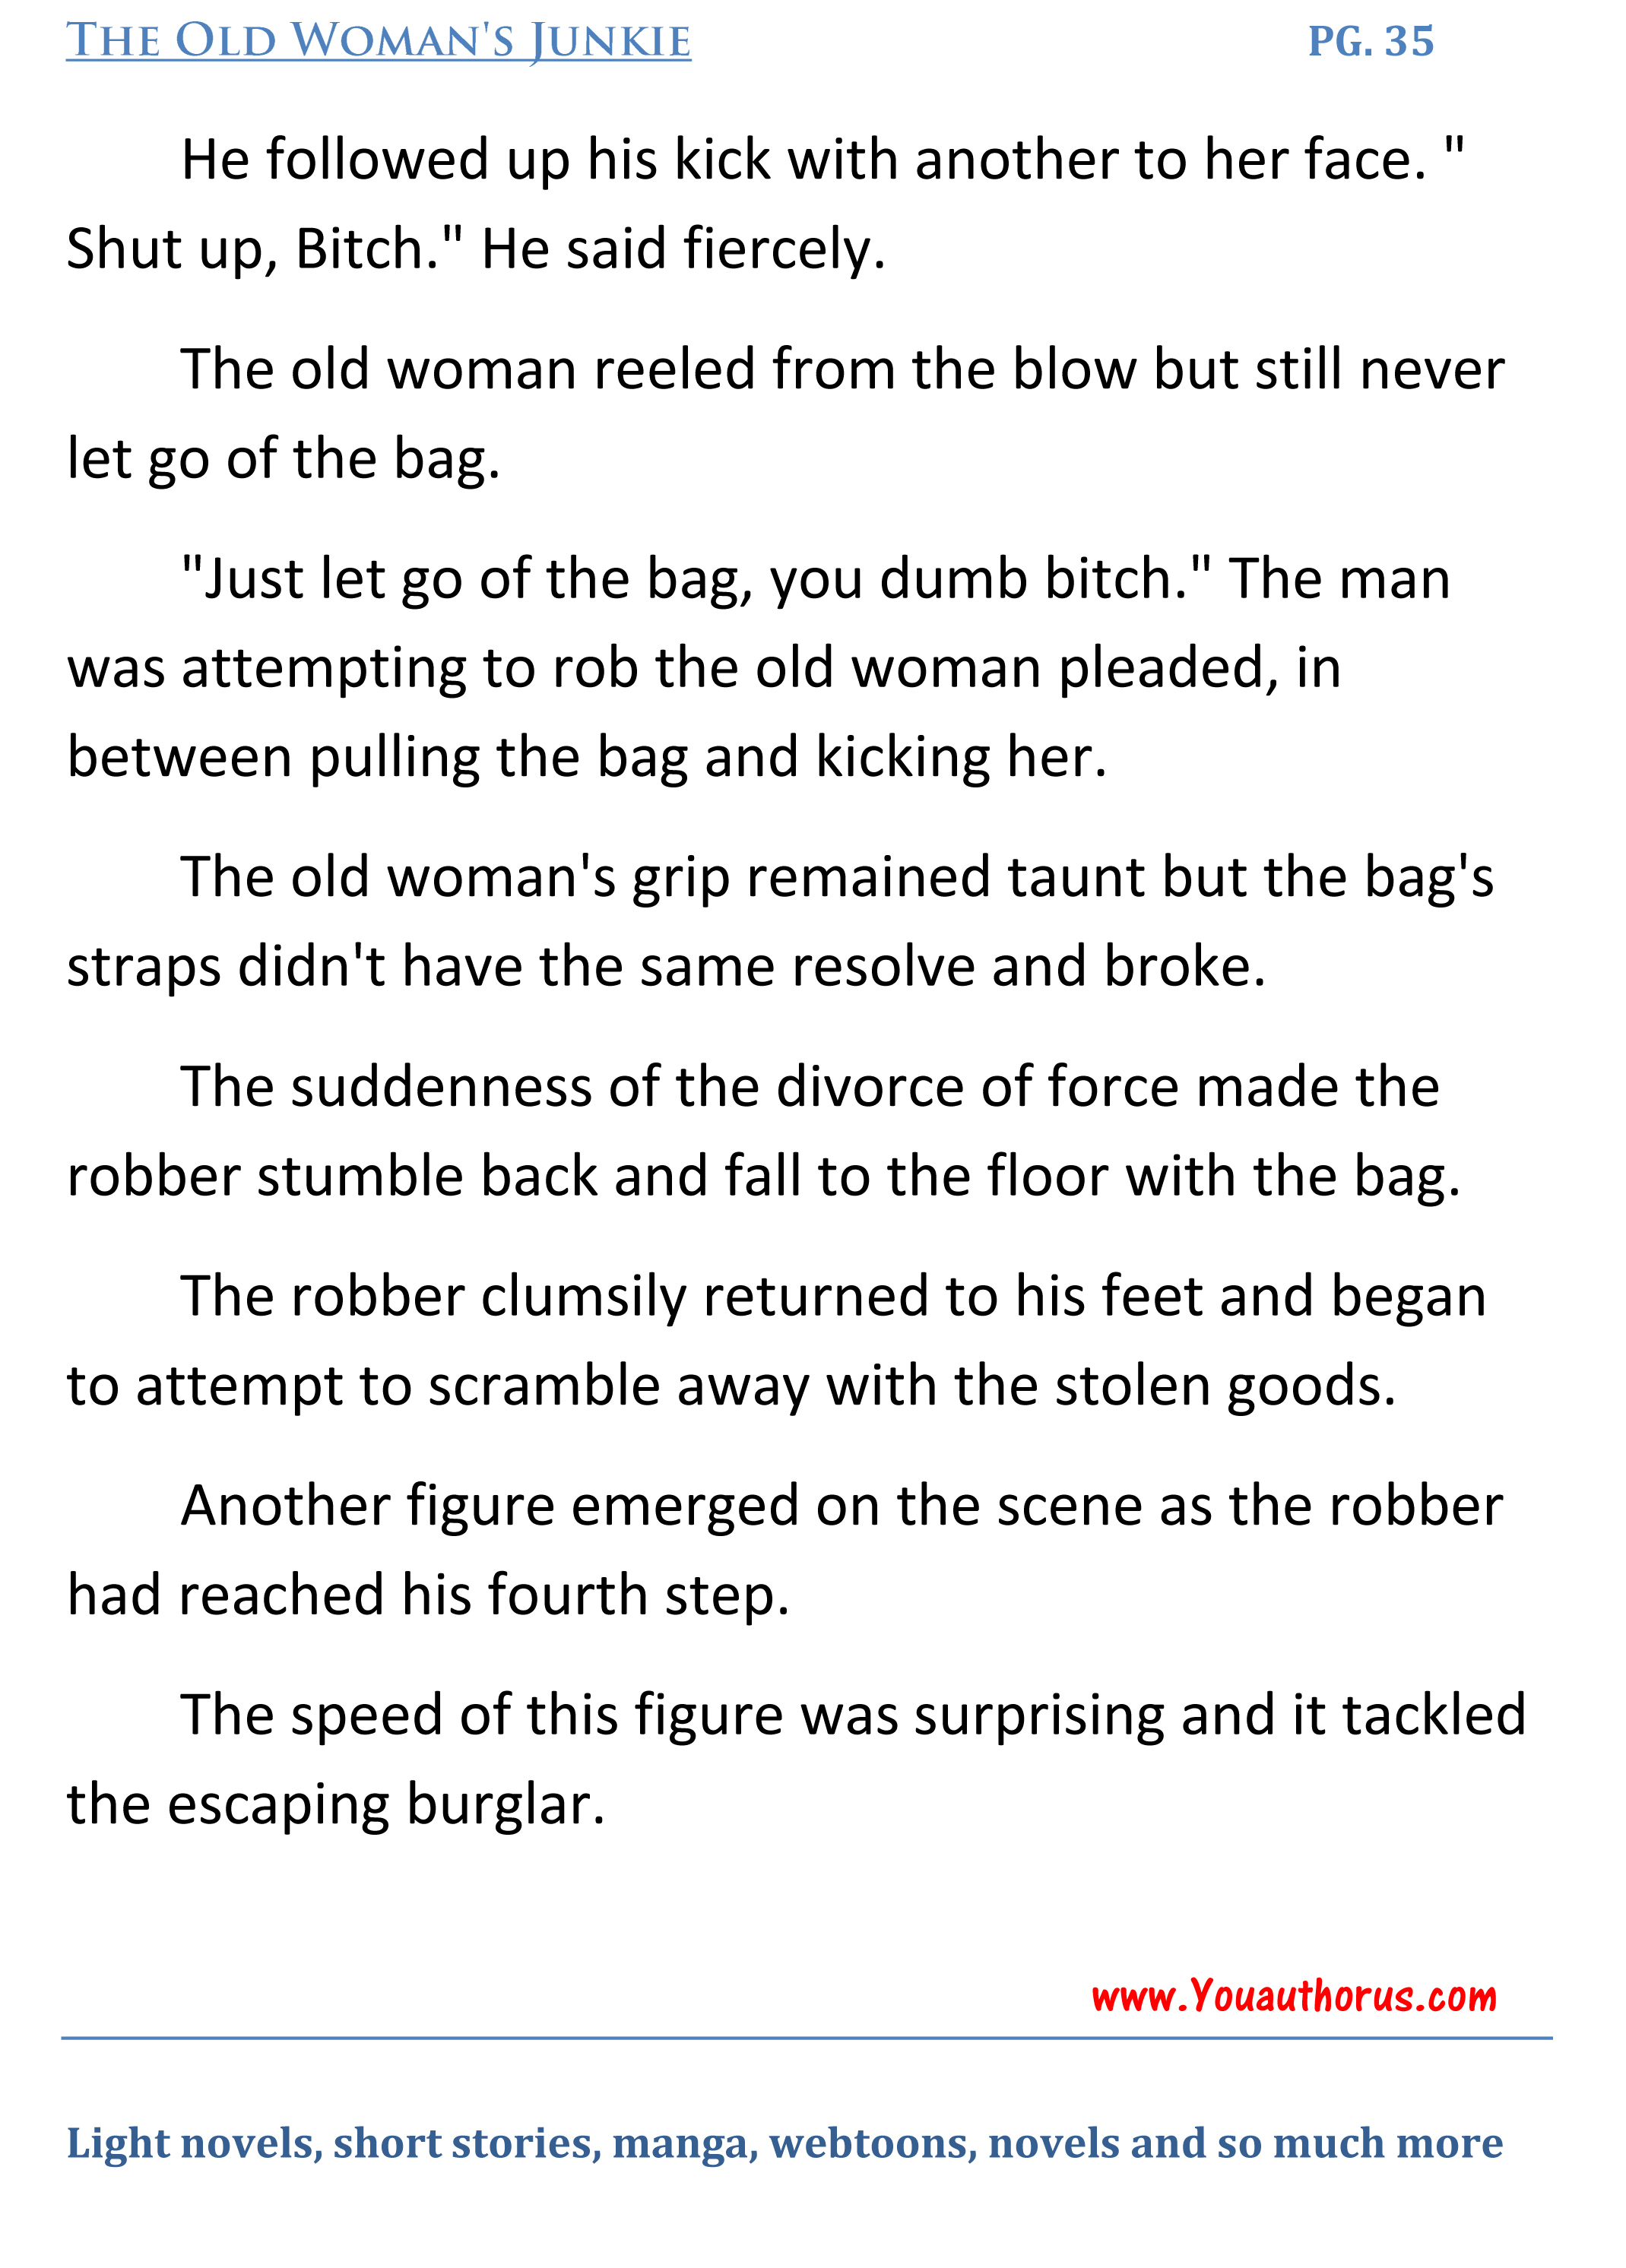 The Old Woman's Junkie(publishing 1)-35 copy